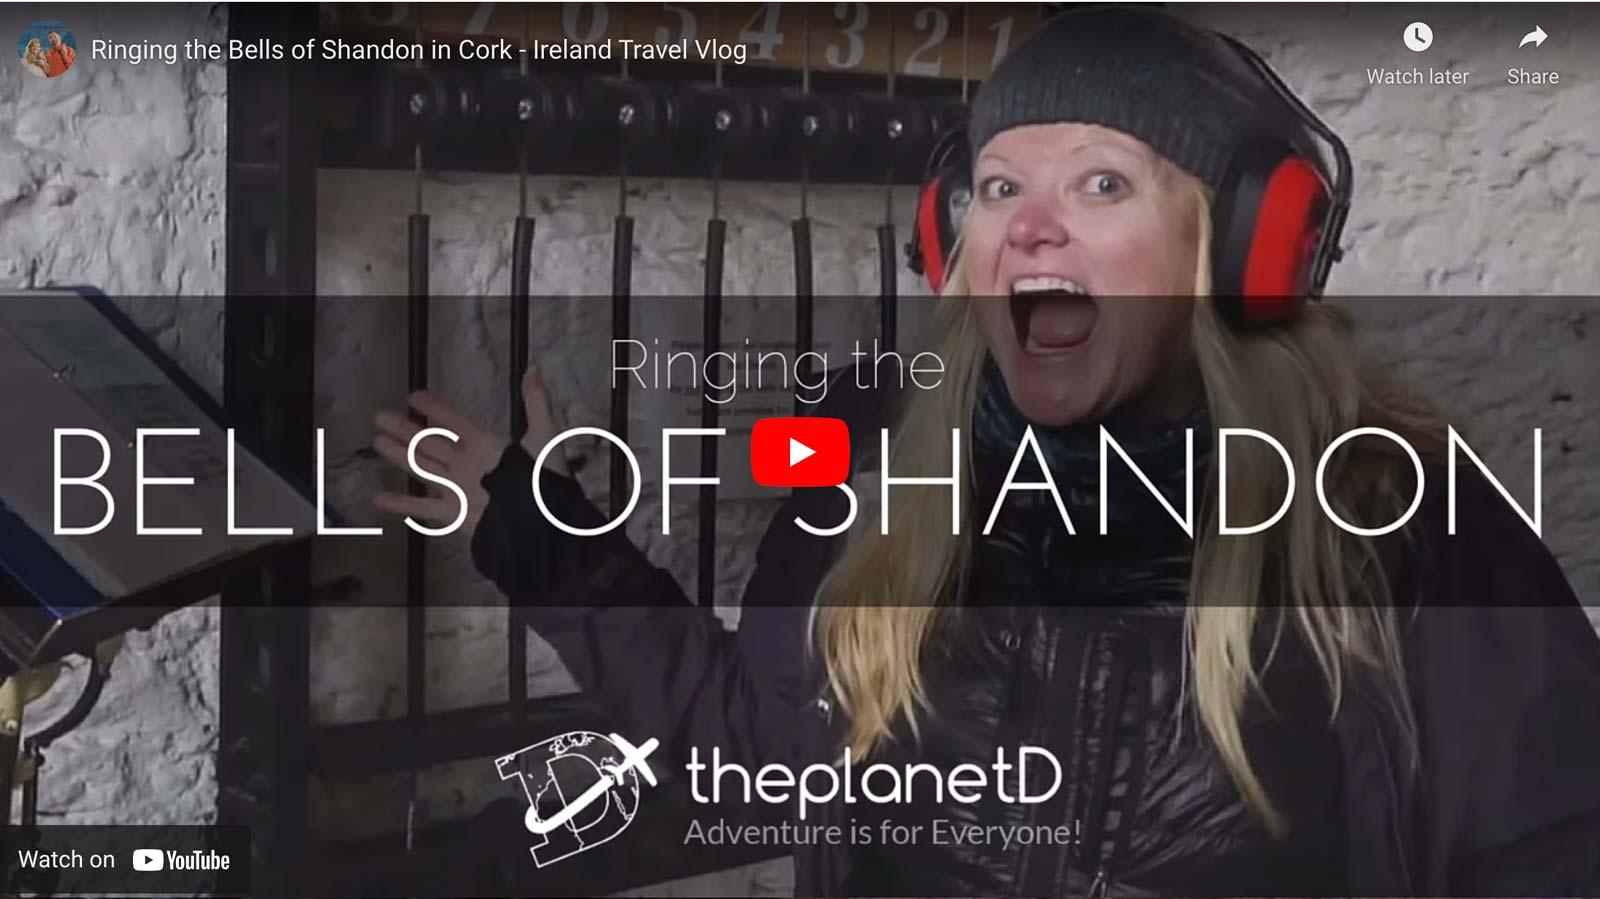 things to do in cork - bells of shandon